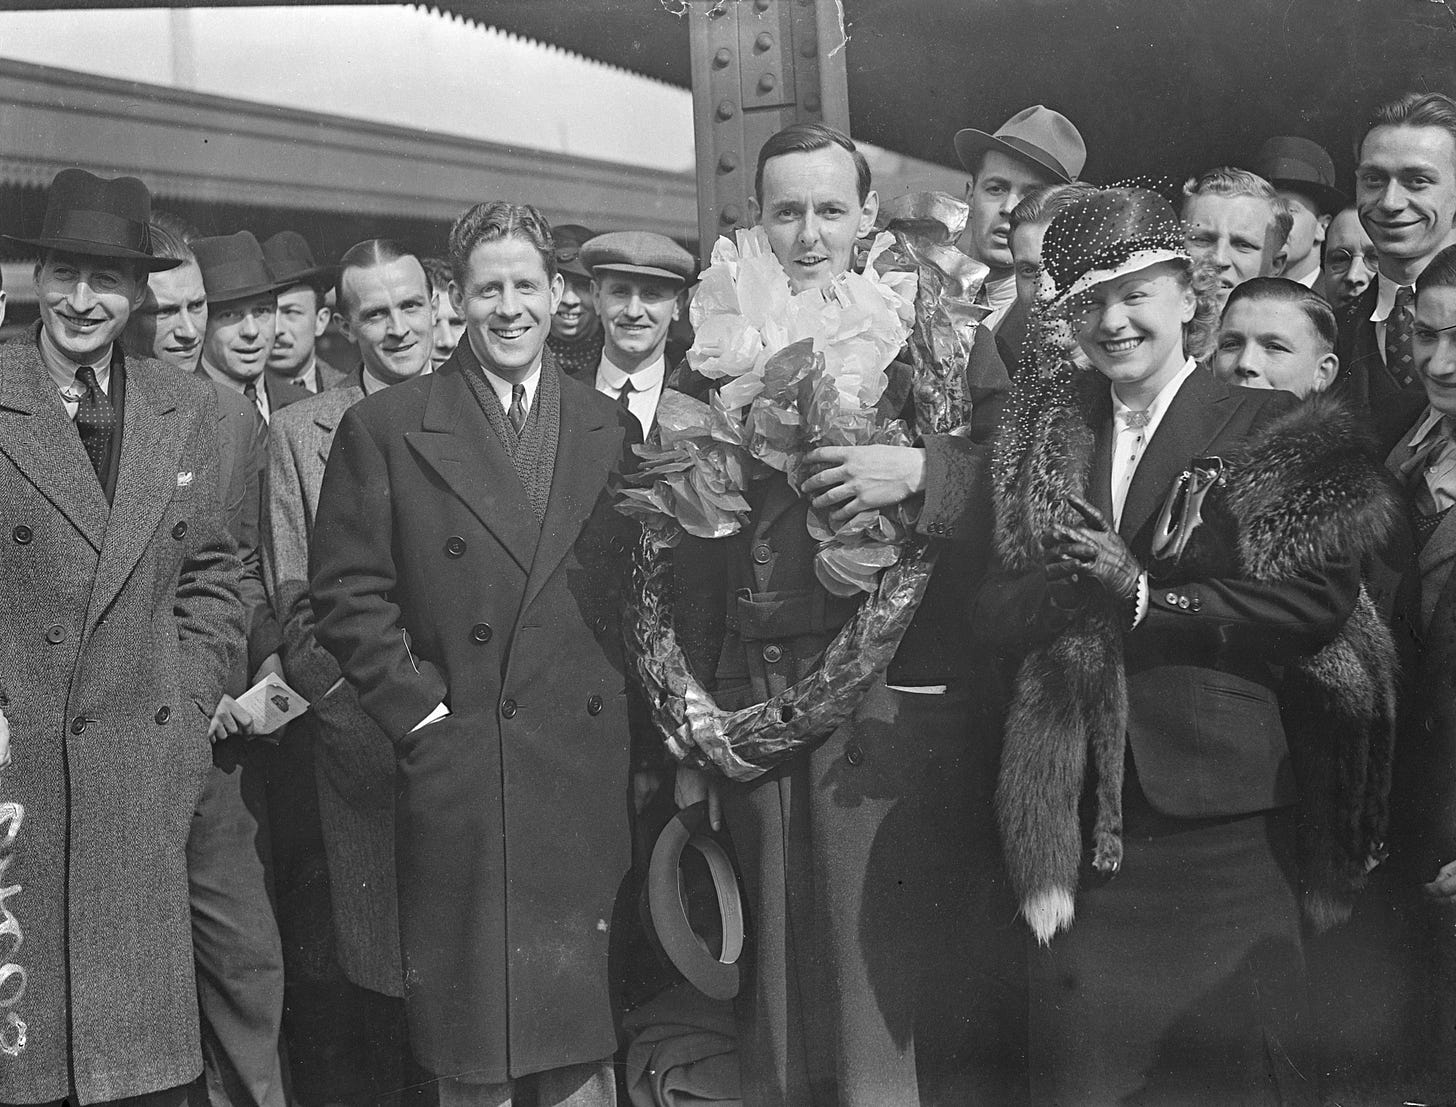 Eric Maschwitz surrounded by a group of people with several paper wreaths around his neck